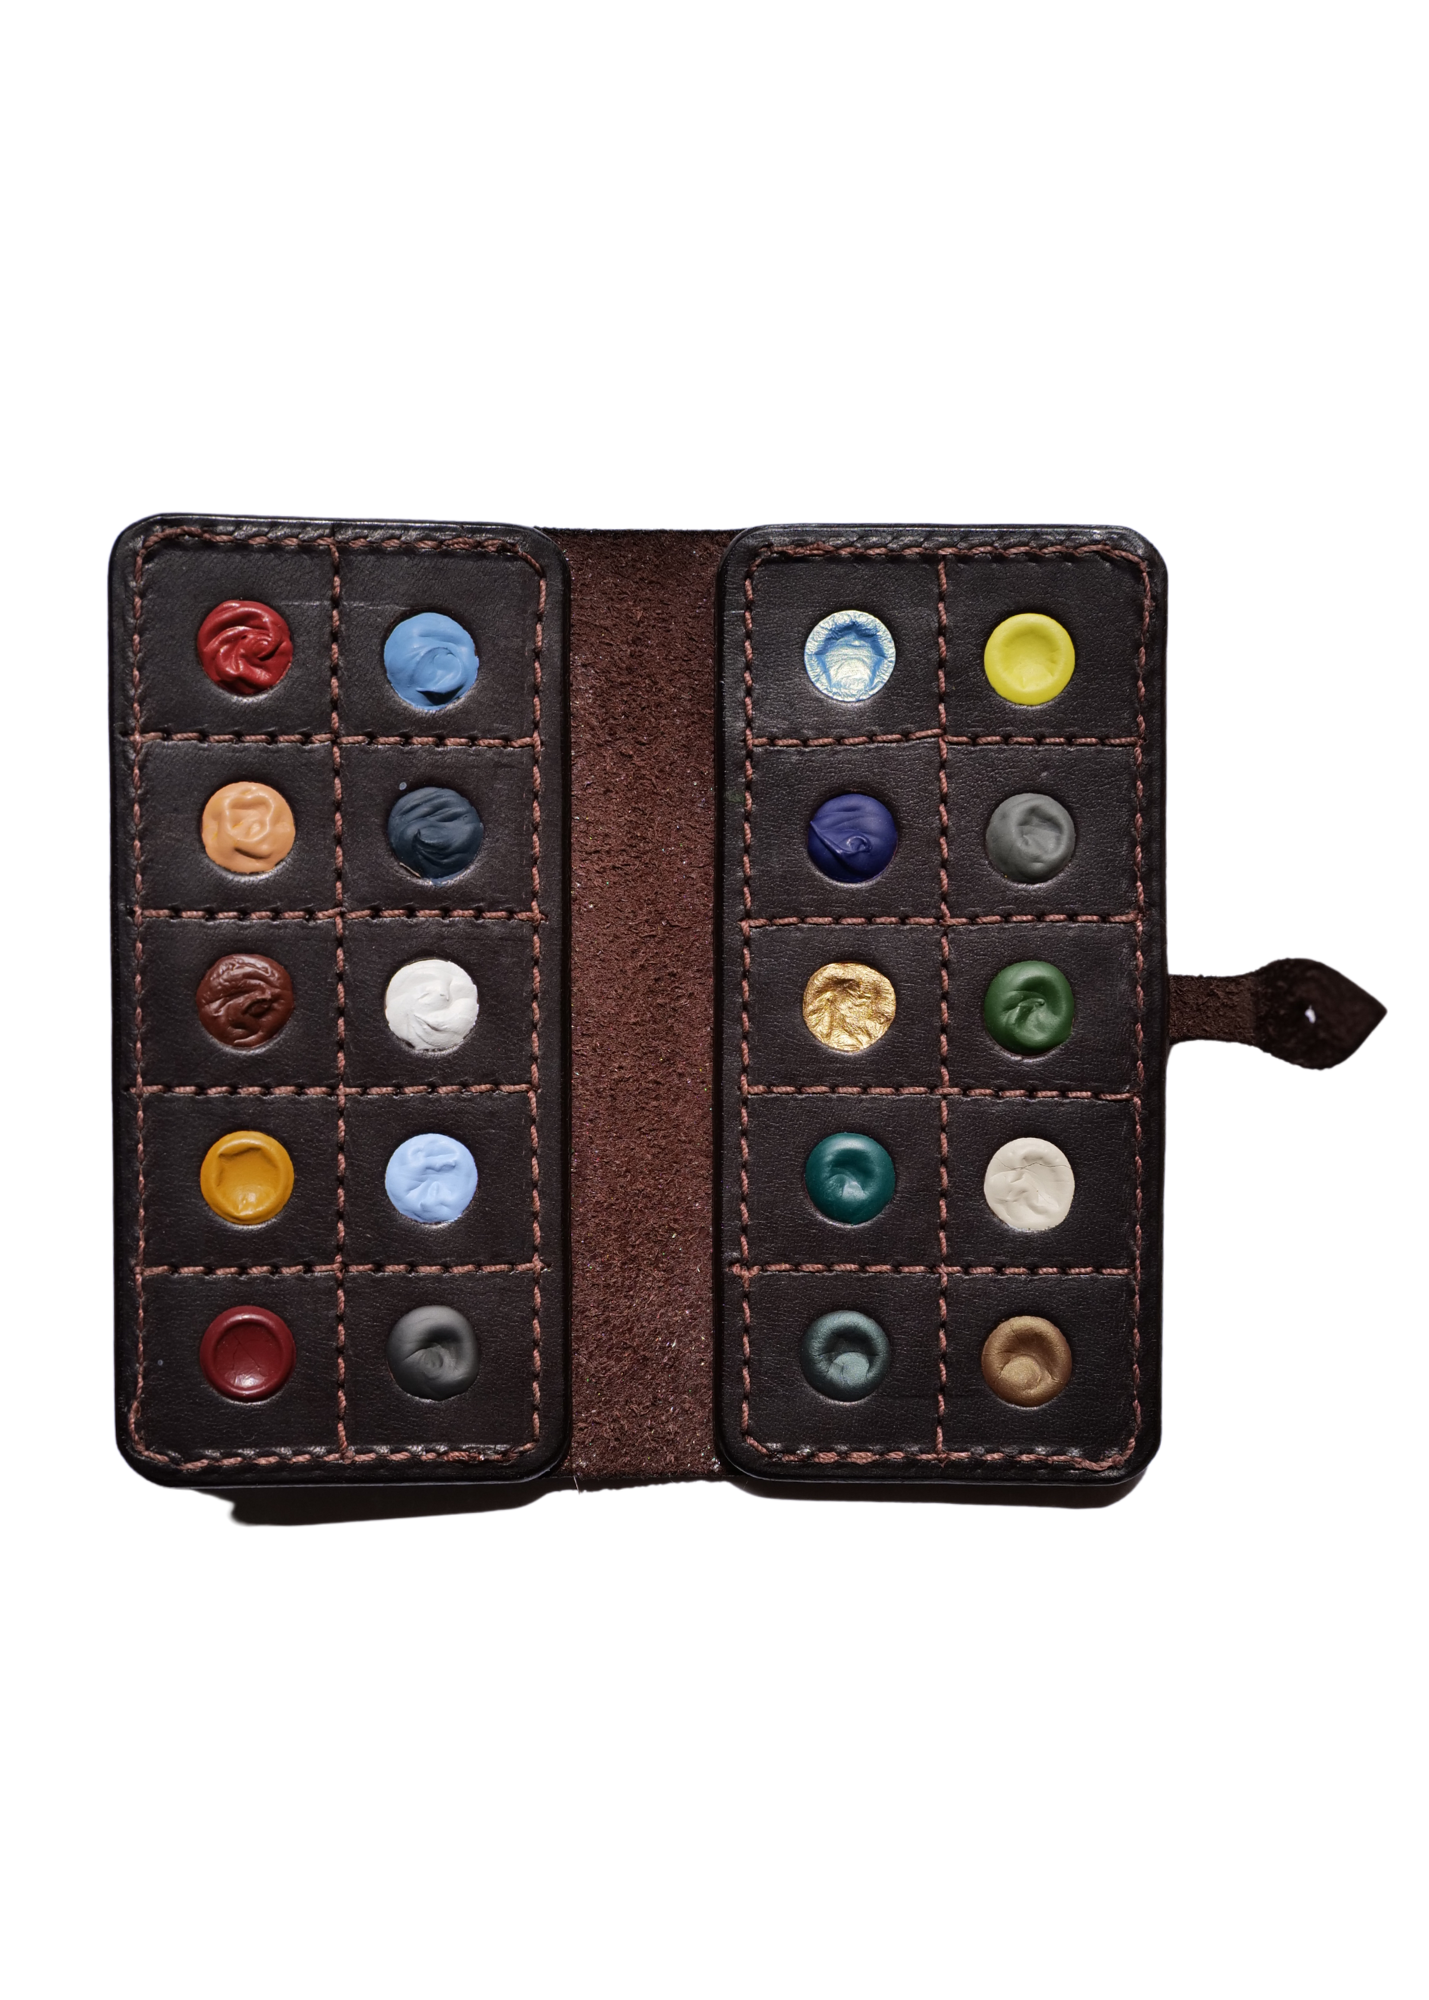 Beam Paints x Martha Mae: 2nd Edition Turner Plein Air Watercolor Set of 20 in Leather Case